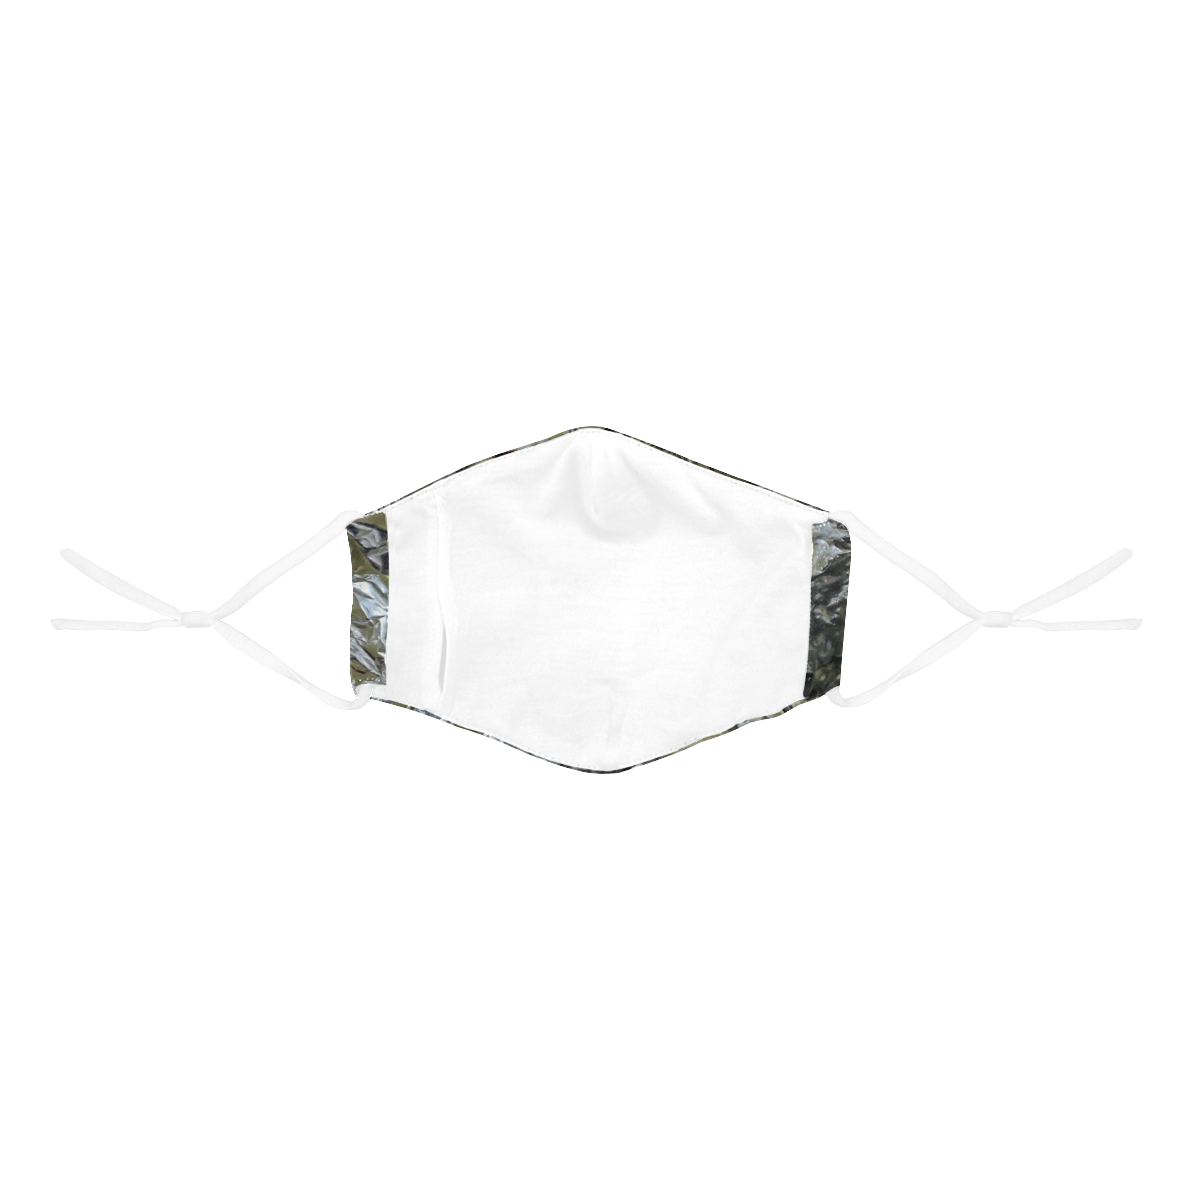 silver valley 3D Mouth Mask with Drawstring (15 Filters Included) (Model M04) (Non-medical Products)